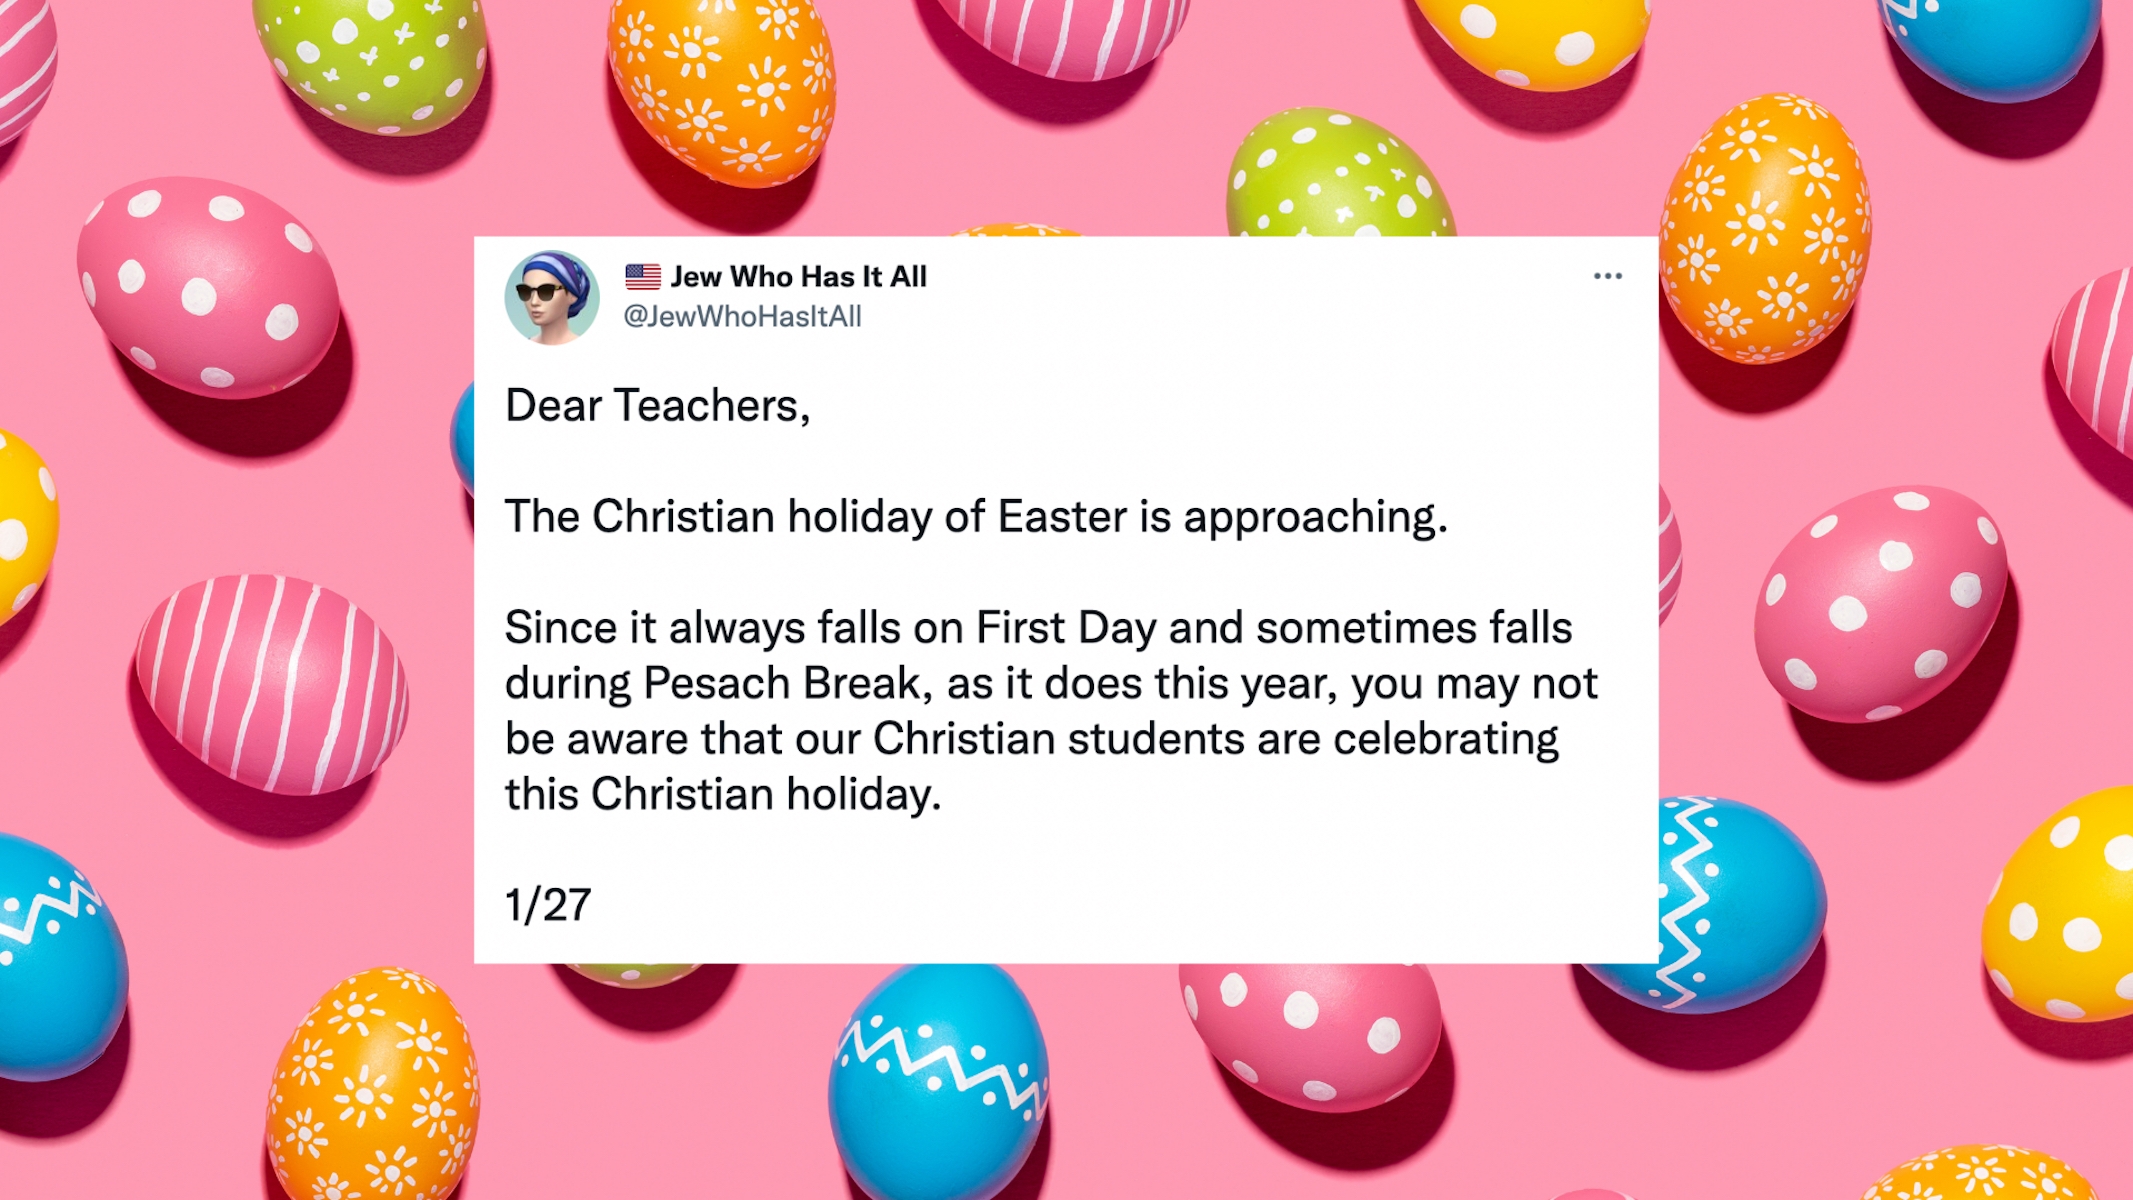 Twitter thread reads: Dear Teachers, The Christian holiday of Easter is approaching. Since it always falls on First Day and sometimes falls during Pesach Break, as it does this year, you may not be aware that our Christian students are celebrating this Christian holiday. 1/27